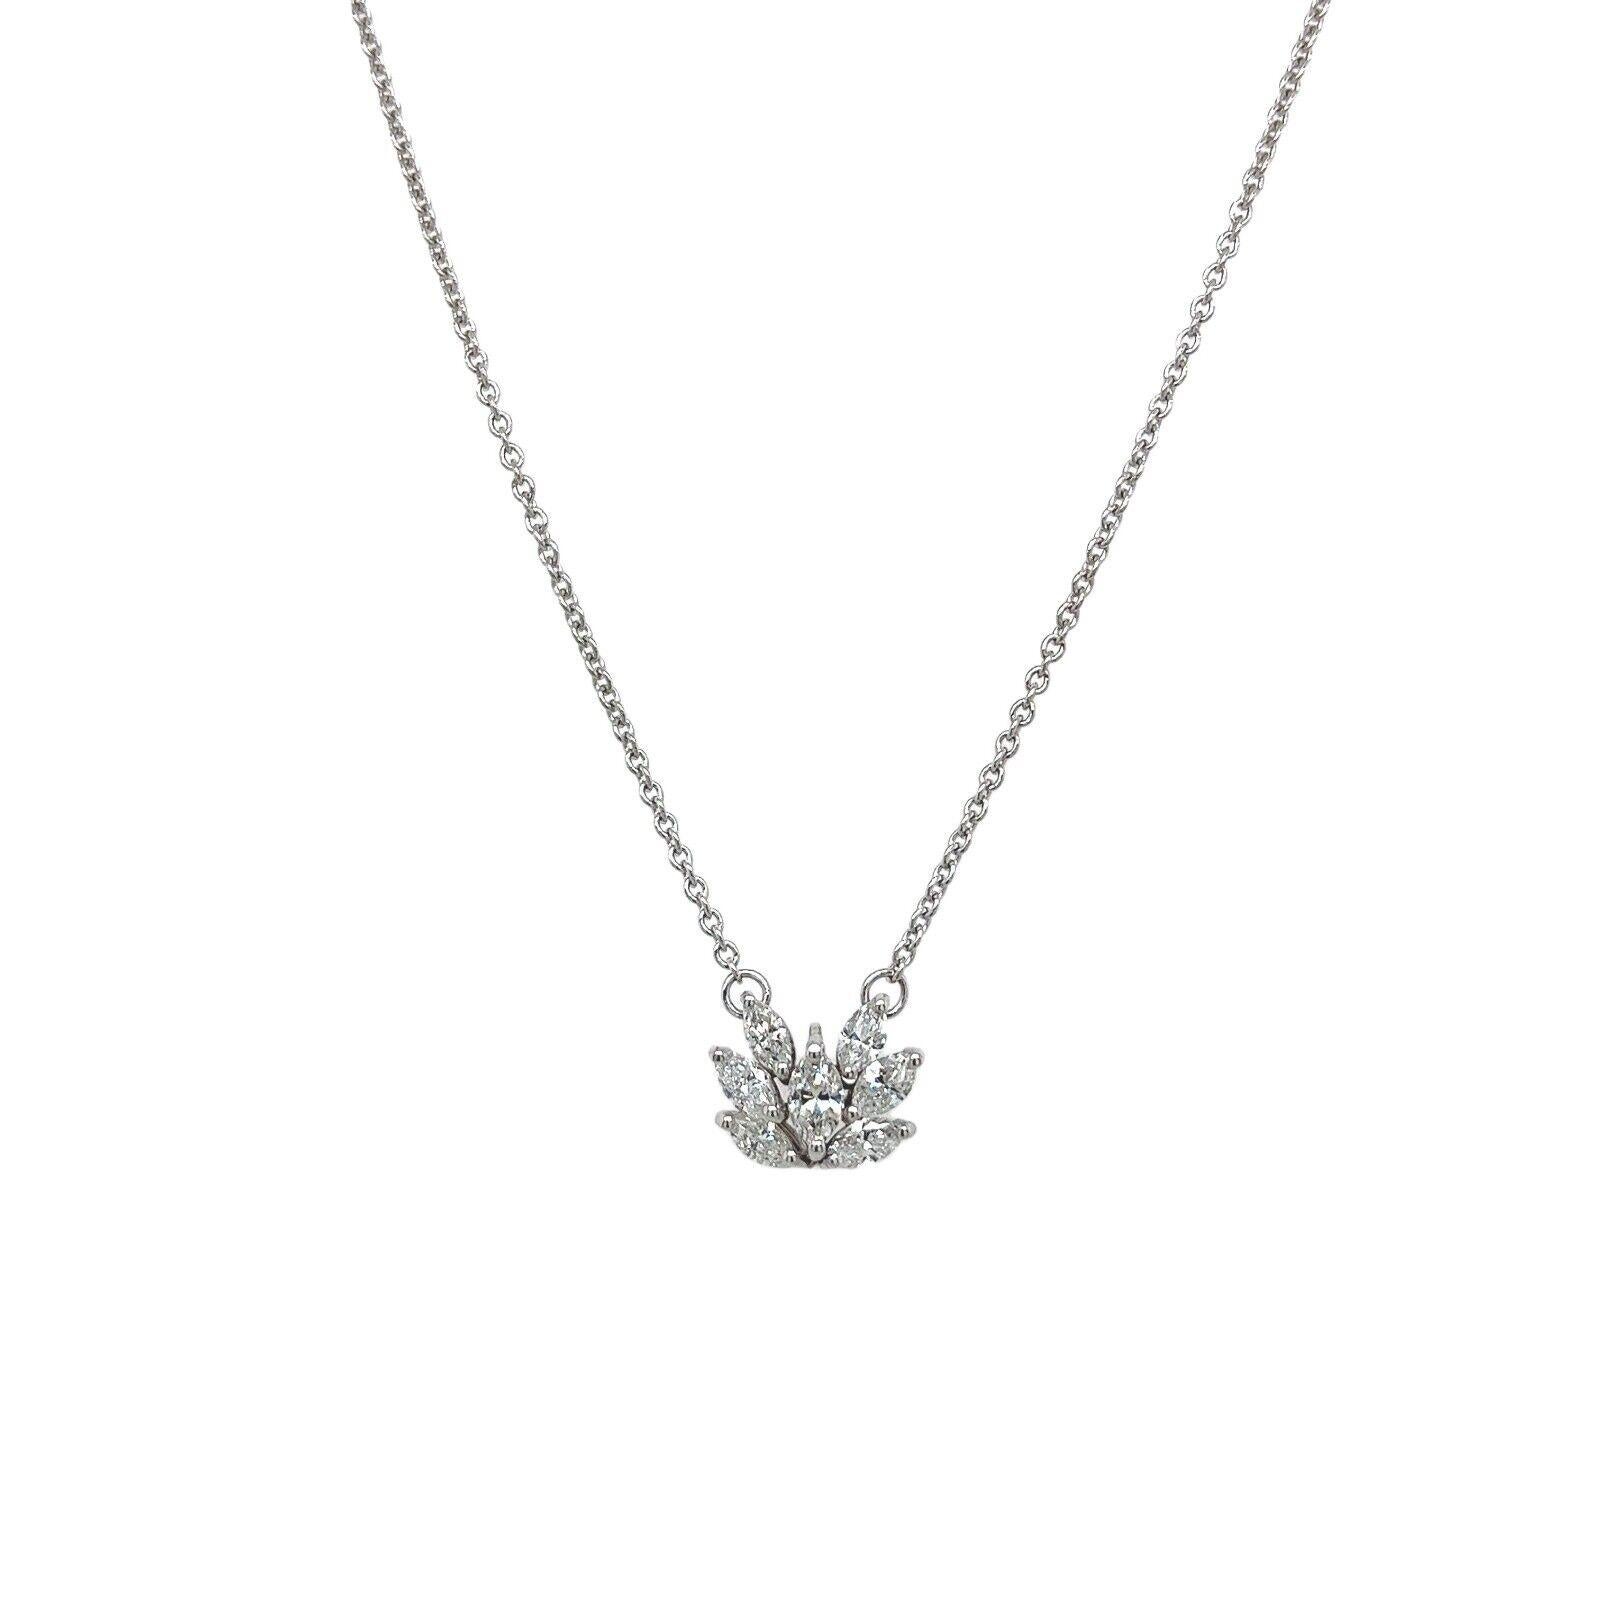 This gorgeous Diamond pendant is set with 7 marquise cut Diamonds in 18ct Gold, The pendant is suspended from a 14ct White Gold chain  that measures 18 inches, adjustable at 16